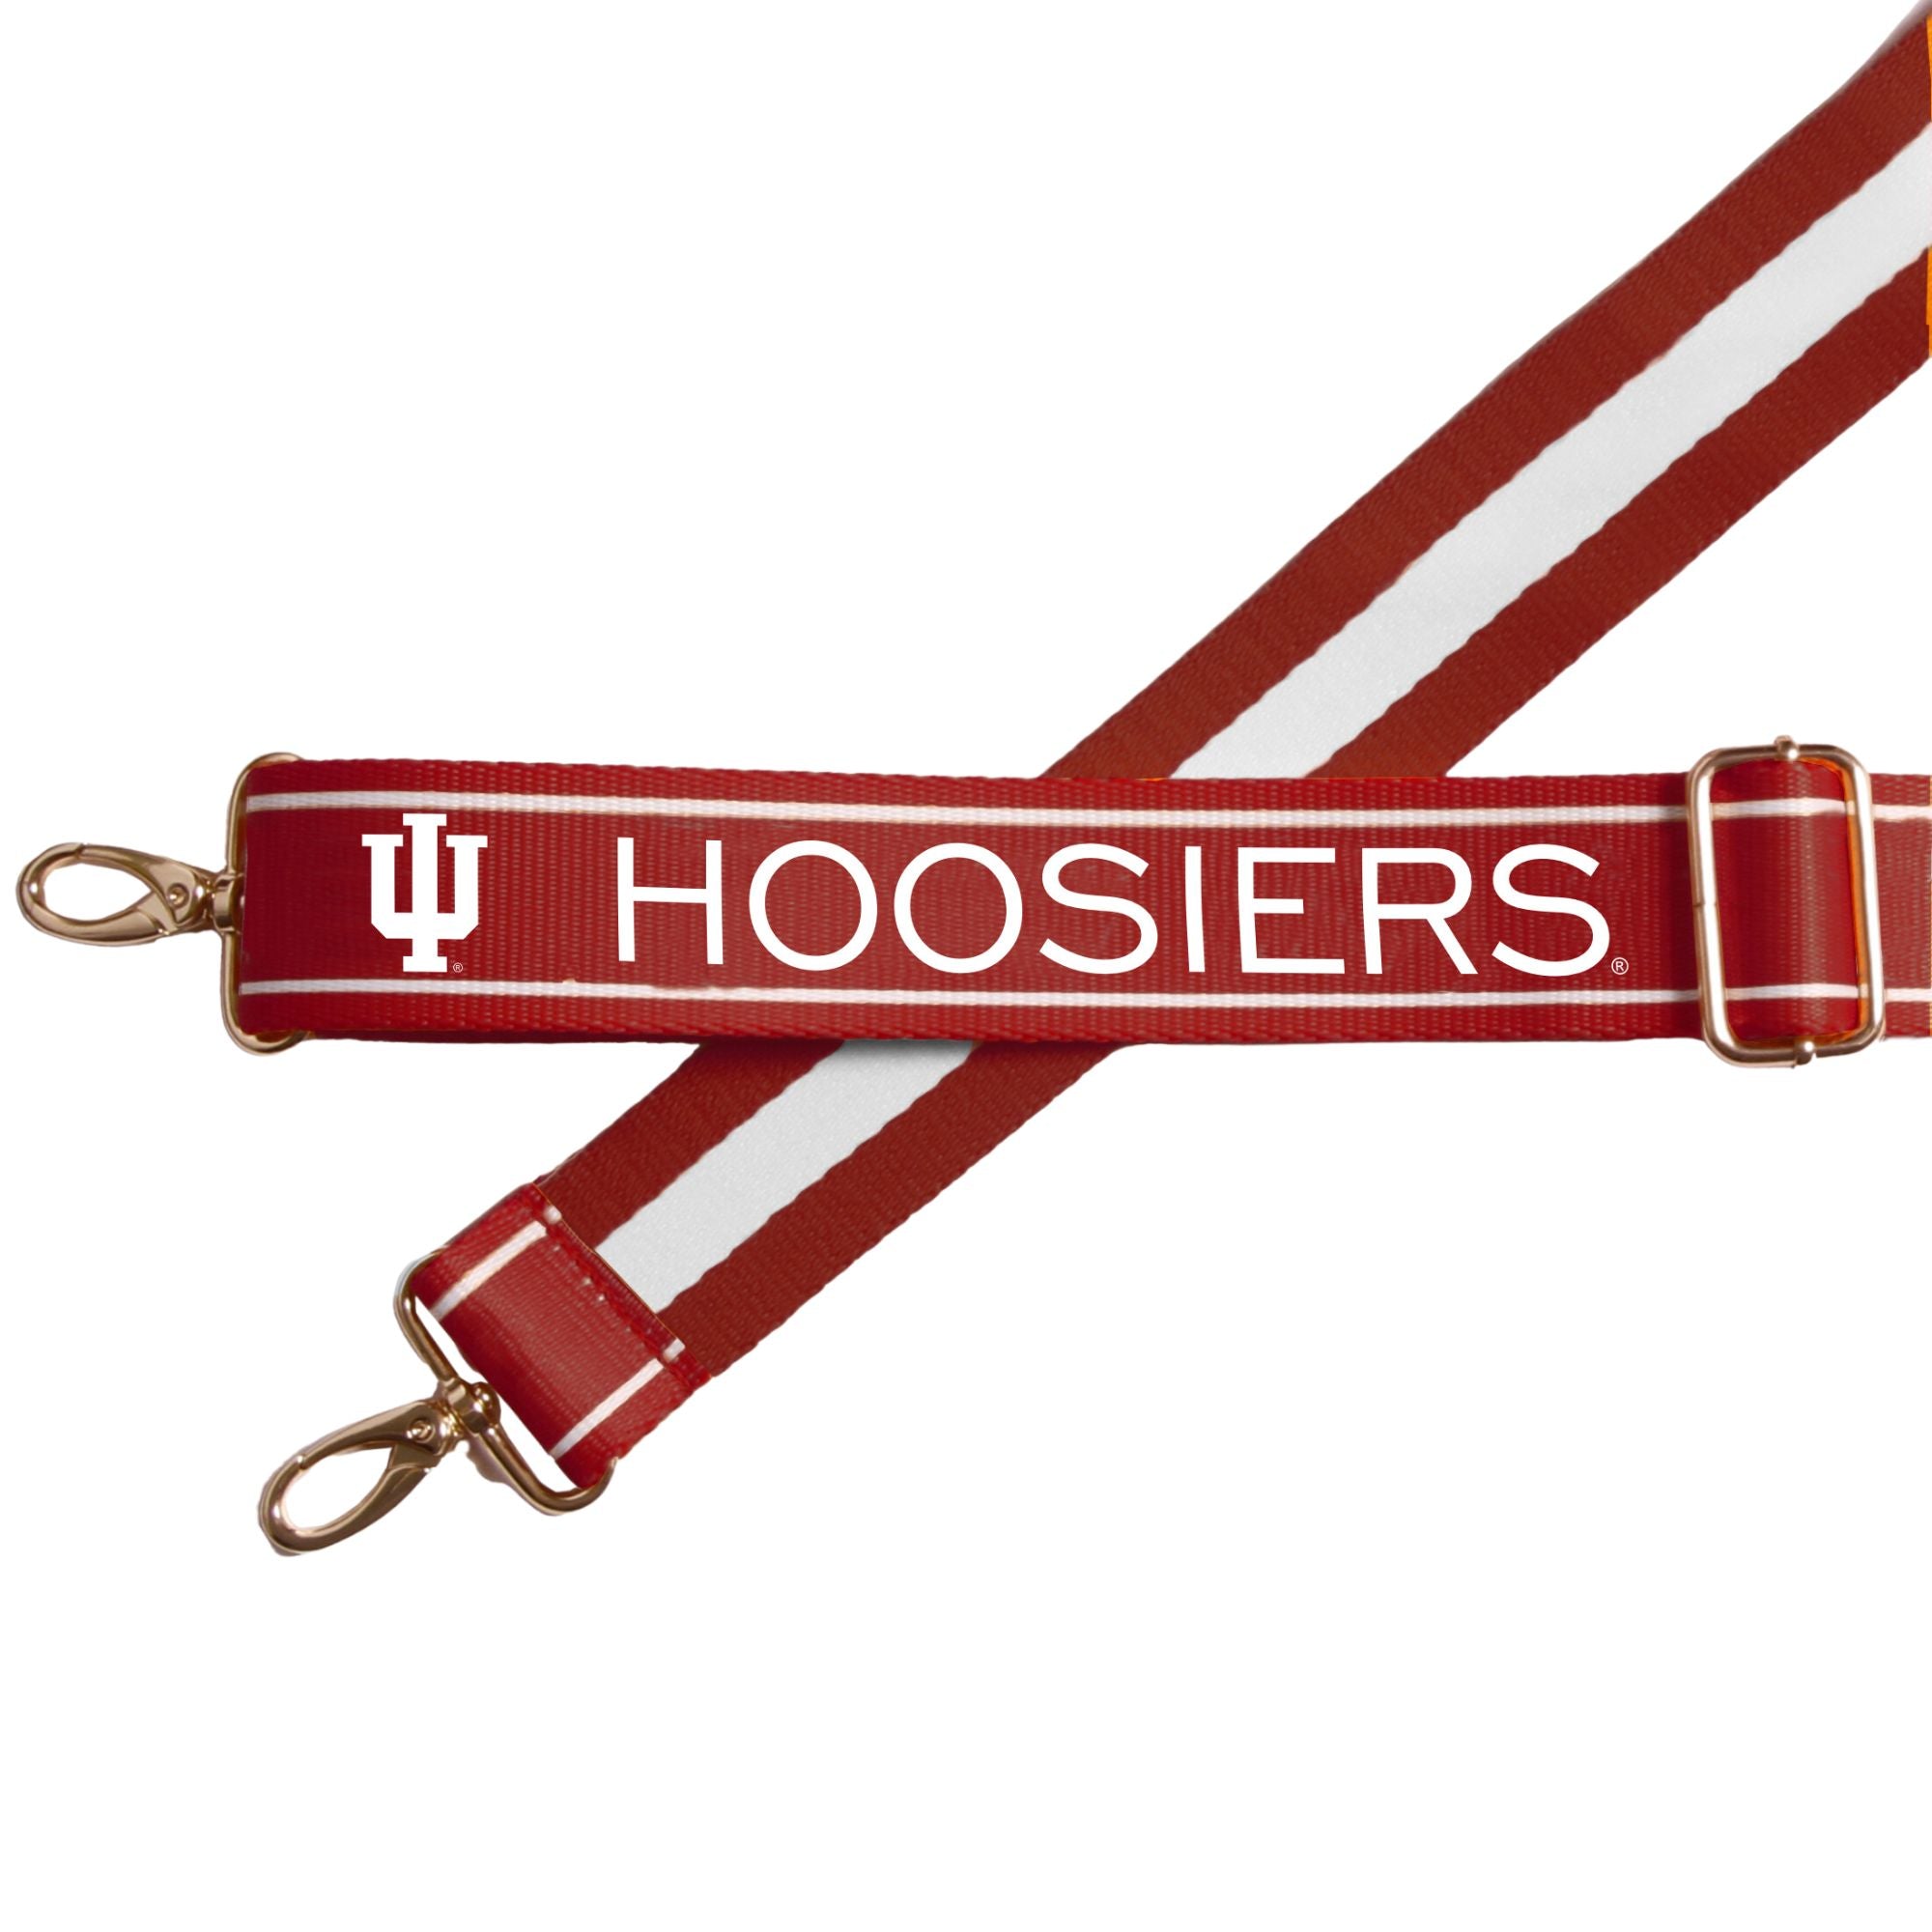 INDIANA 1.5" - Officially Licensed - Stripe